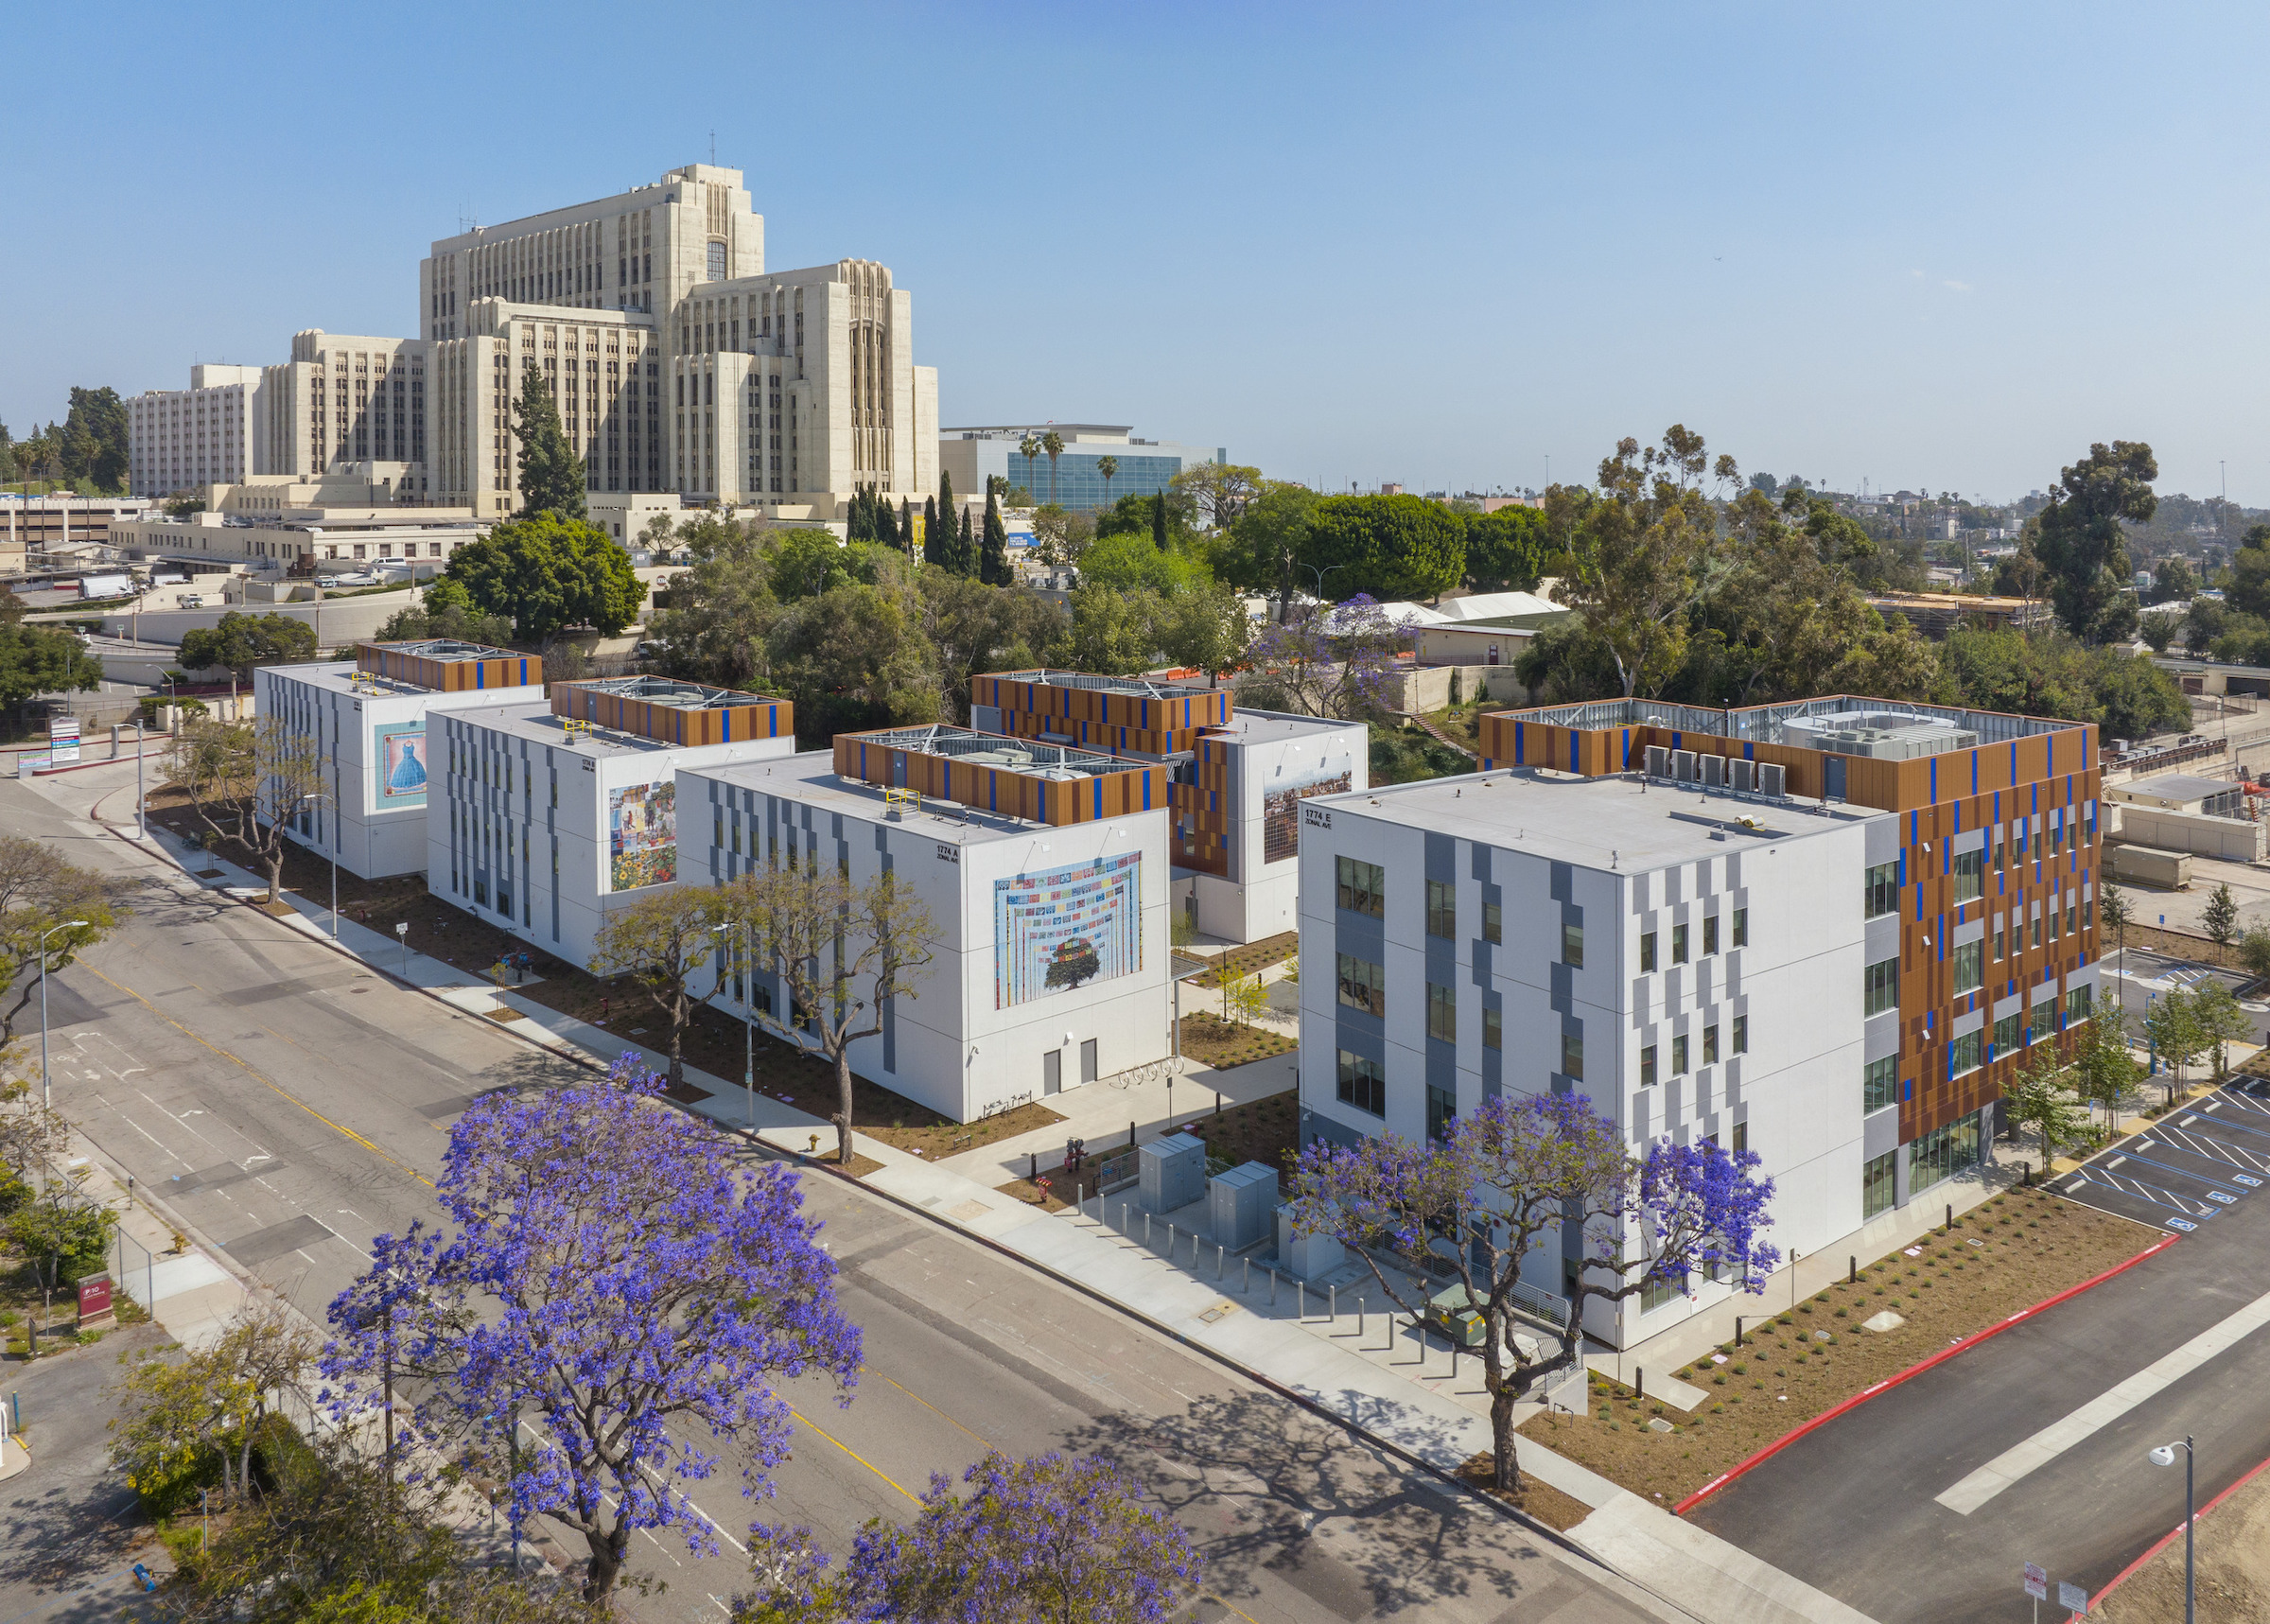 The 69,000-sf Los Angeles County + USC Restorative Care Village consists of a four-story recuperative care center that provides stable housing for those recently discharged from hospitals,